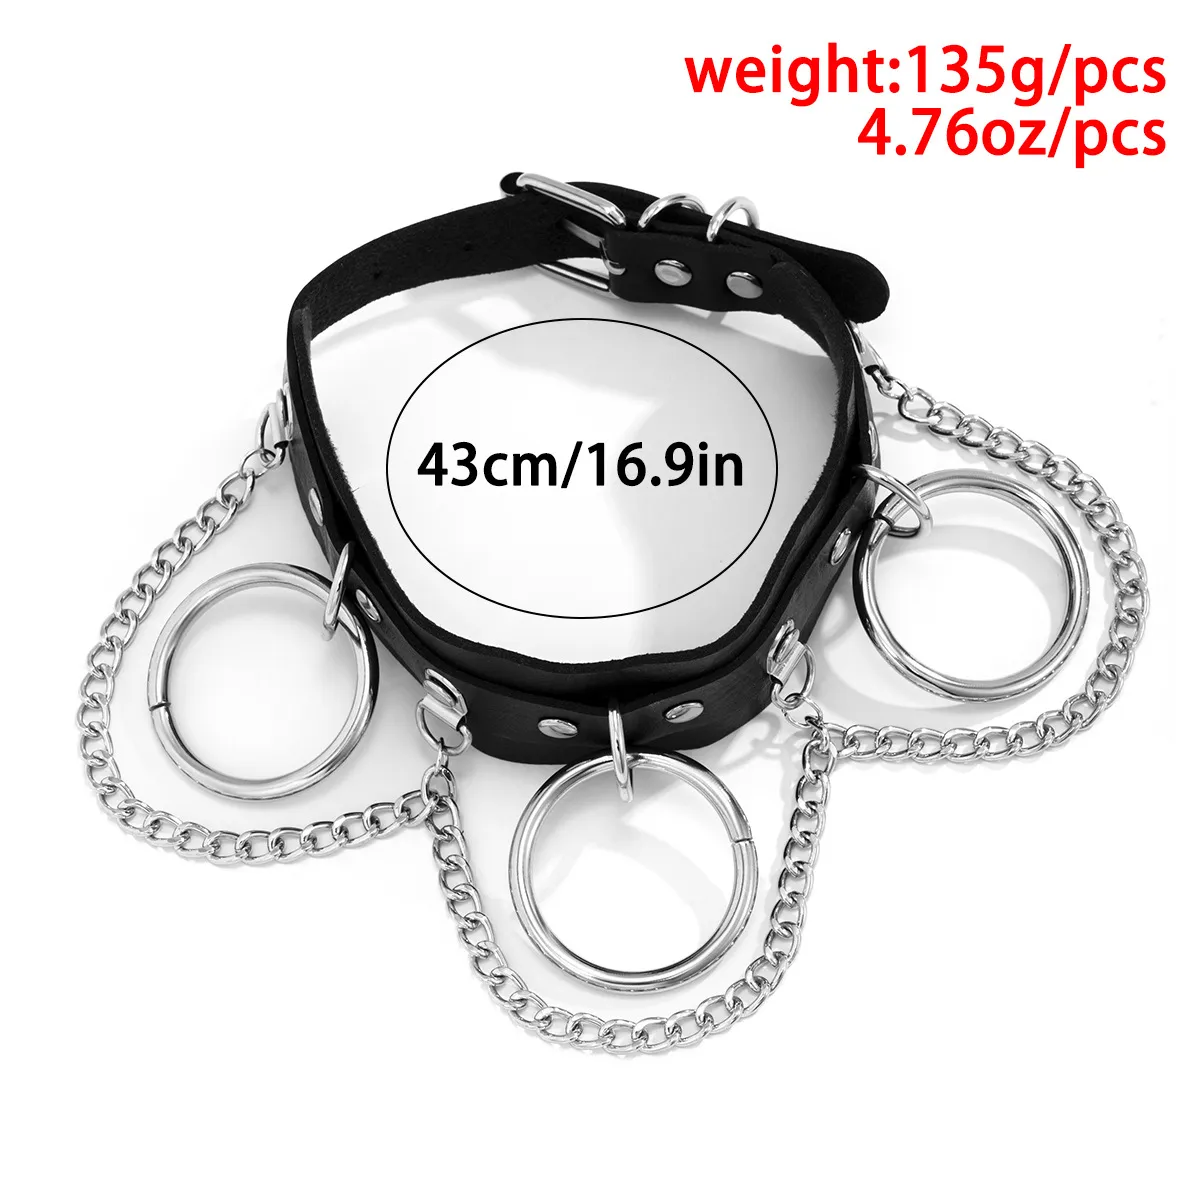 2022 New Gothic Punk Leather Necklace Goth Choker Cross Black Thick Collar bdsm For Women Spiked Y2k Grunge Rock Hip Hop Sexy Fashion Bijoux Jewelry Gifts Wholesale